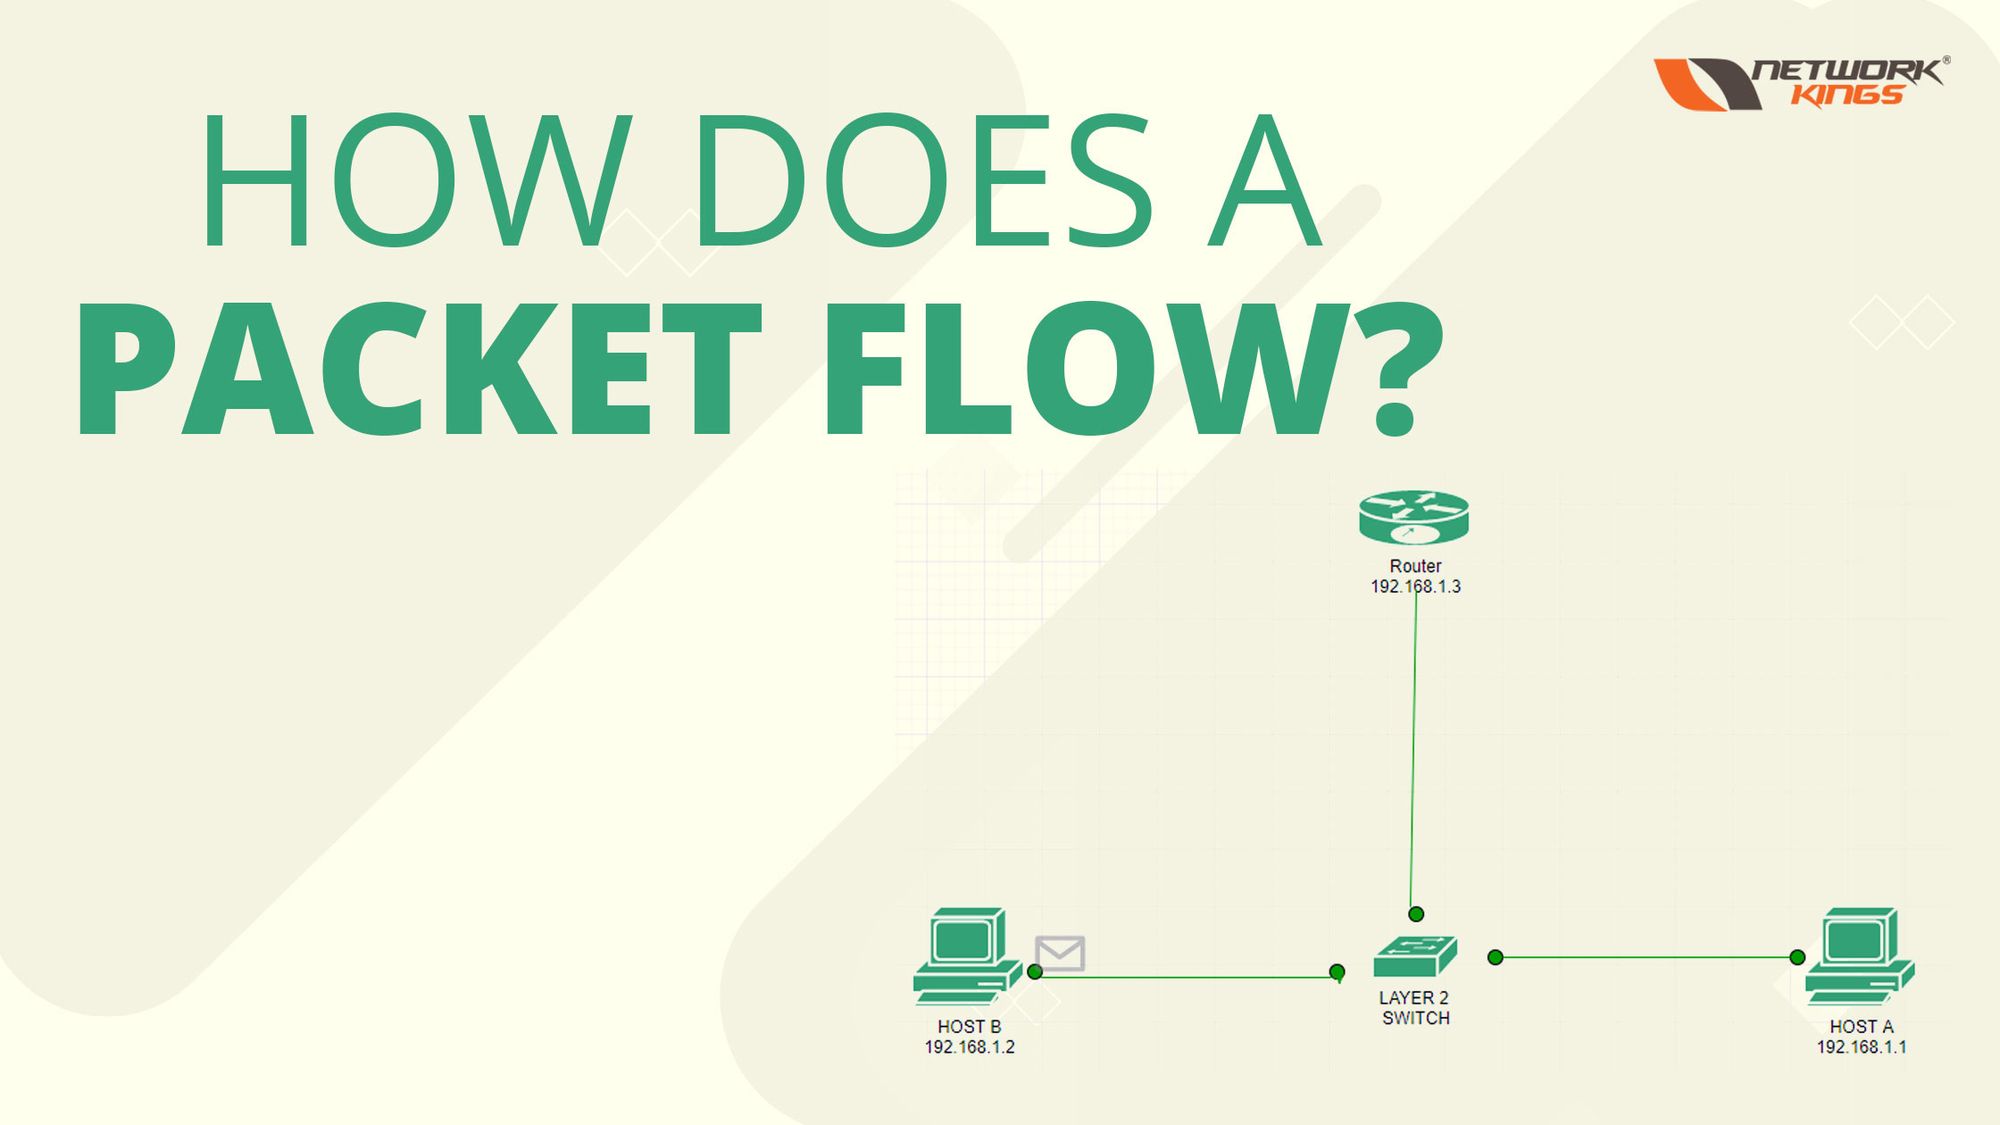 How does a packet flow?